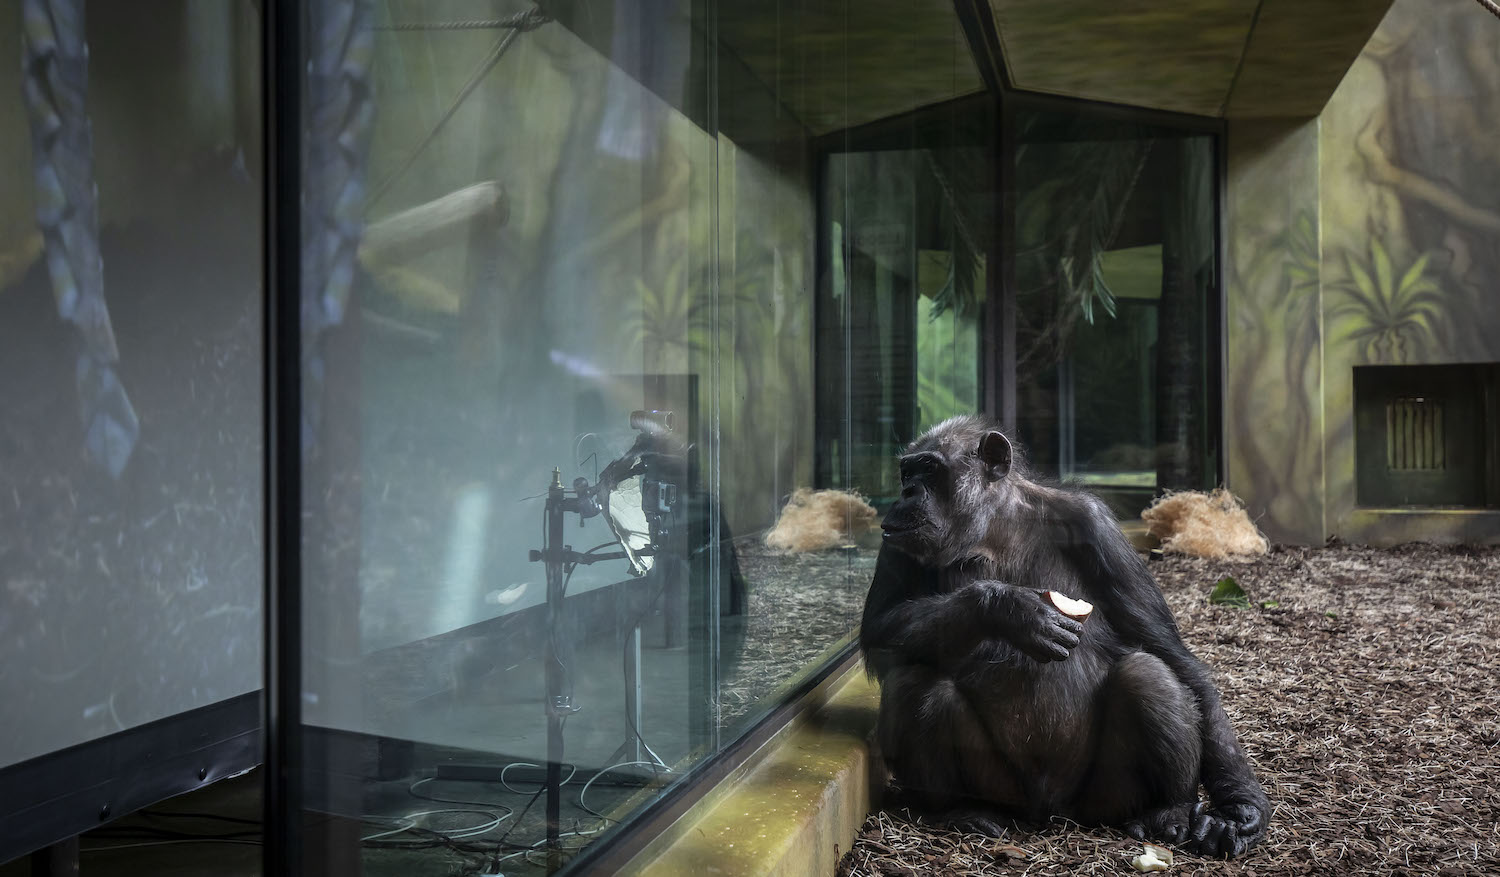 DVUR KRALOVE NAD LABEM, CZECH REPUBLIC - MARCH 19: A Chimpanzee watches a live-stream on a screen set up in an enclosure at the Safari Park on March 19, 2021 in Dvur Kralove nad Labem, Czech Republic. The park has set up live-stream broadcasting from the zoo in Brno to enrich the daily life of their chimpanzees amid lockdown. The Safari Park launched the experimental project to give the chimpanzees something to watch to give them some stimulation while crowds are not allowed to visit the zoo due to the coronavirus pandemic. (Photo by Gabriel Kuchta/Getty Images)